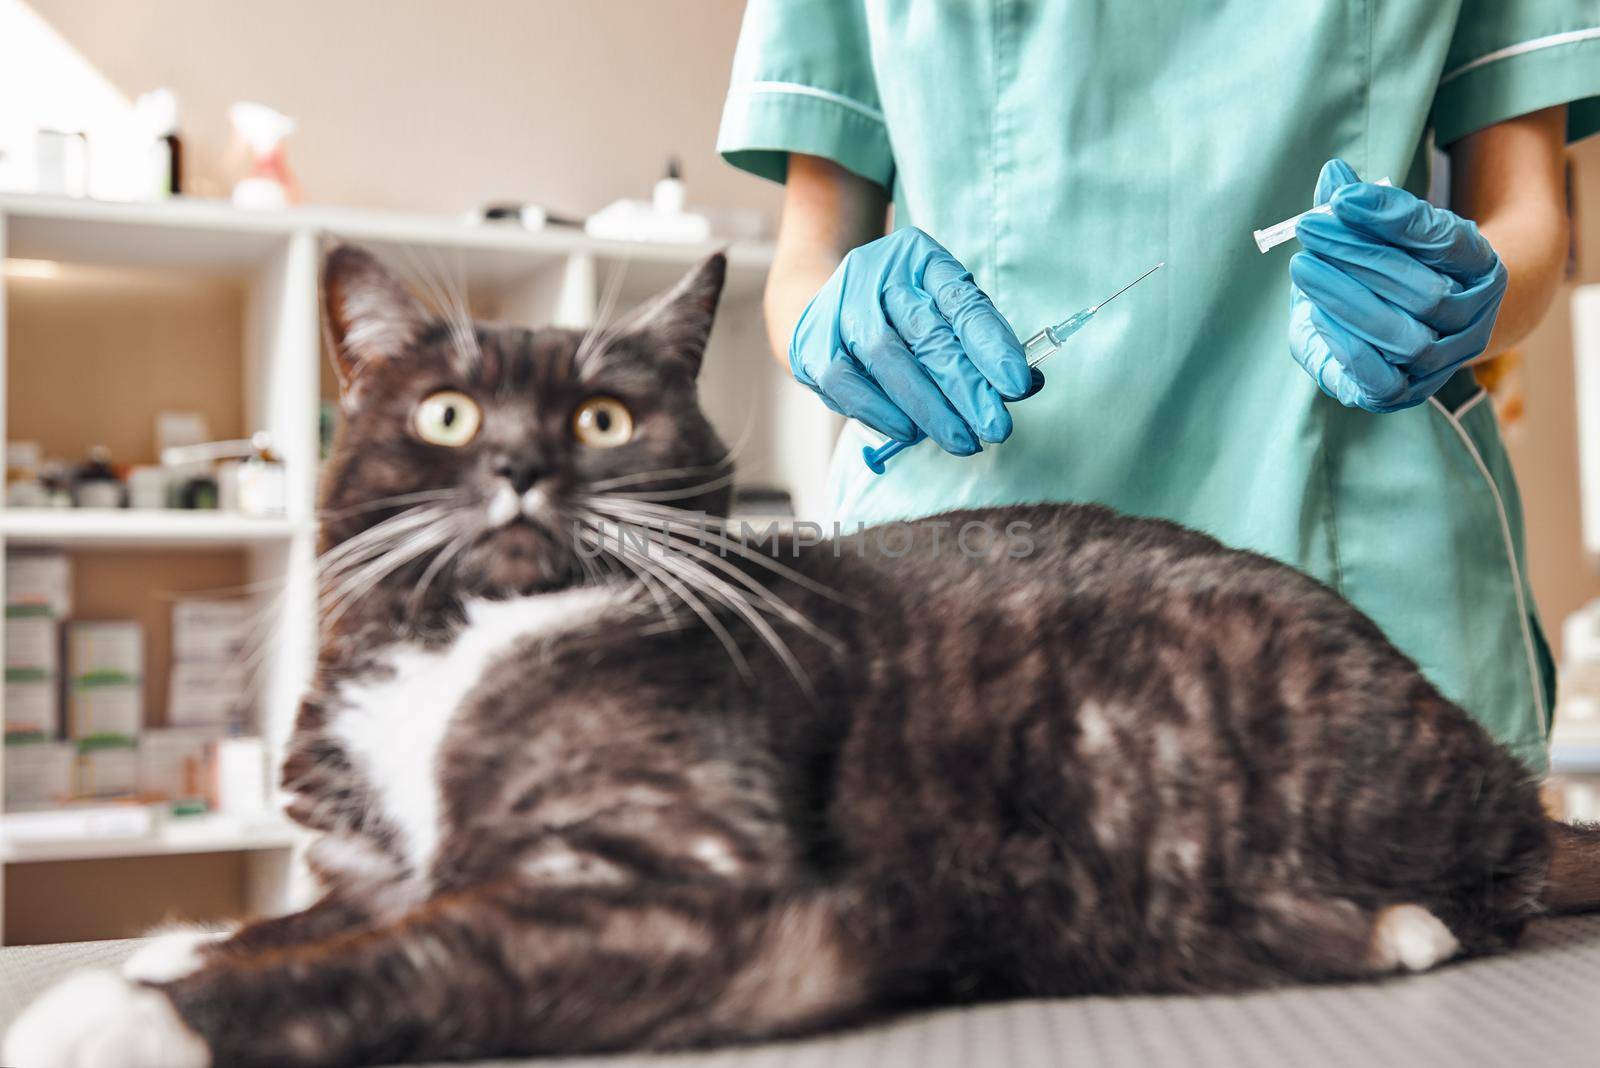 It's not scary Young female veterinarian in work uniform making an injection to a large black and fluffy cat lying on the table in veterinary clinic. Pet care concept. Medicine concept. Animal hospital